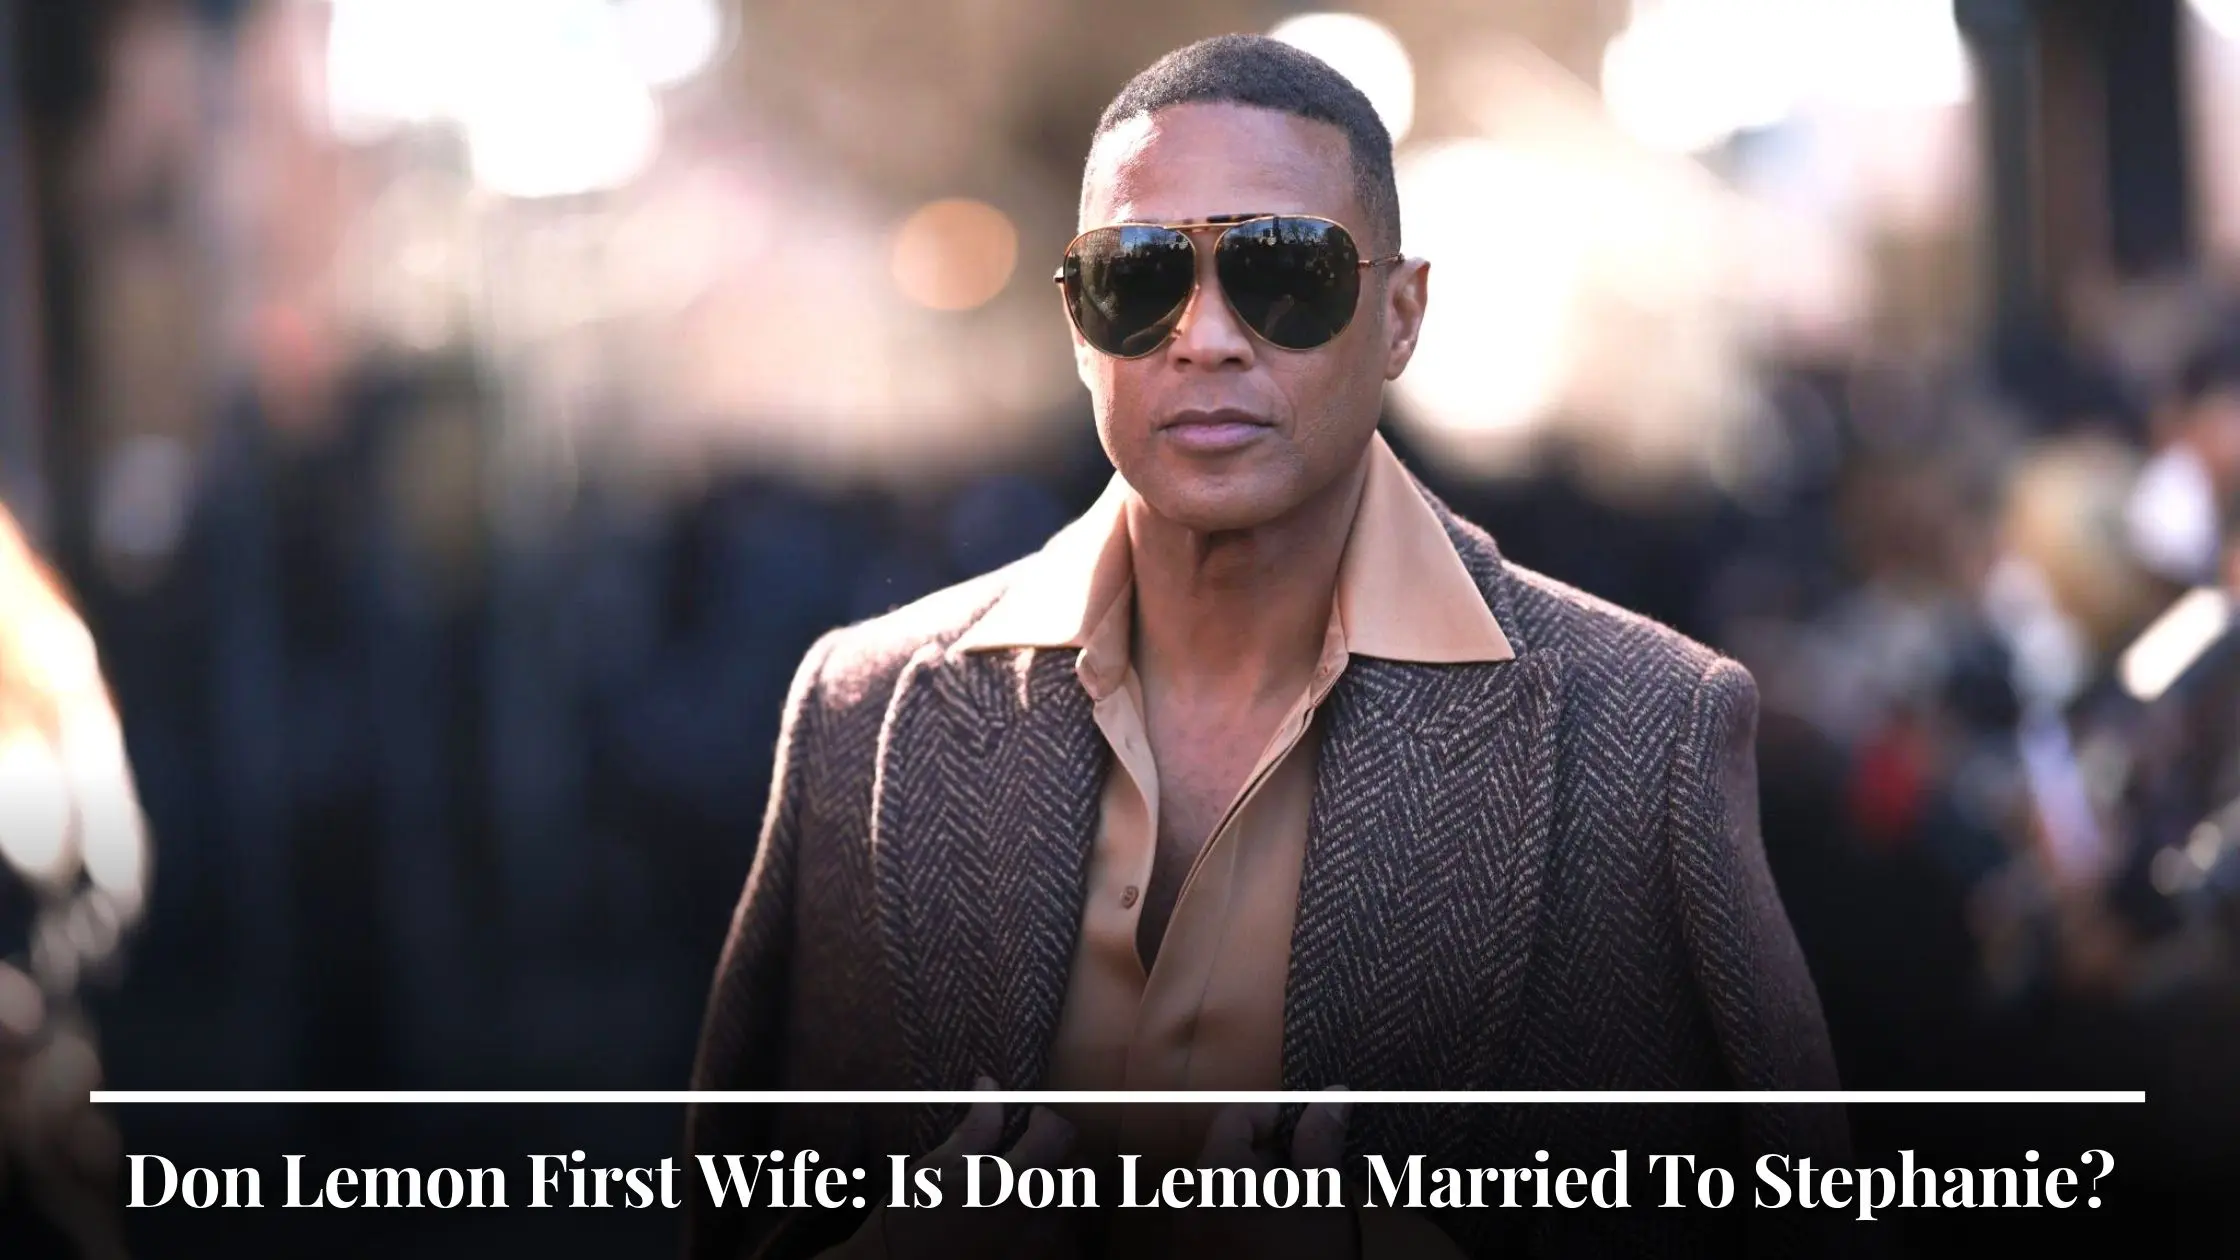 Don Lemon First Wife Is Don Lemon Married To Stephanie